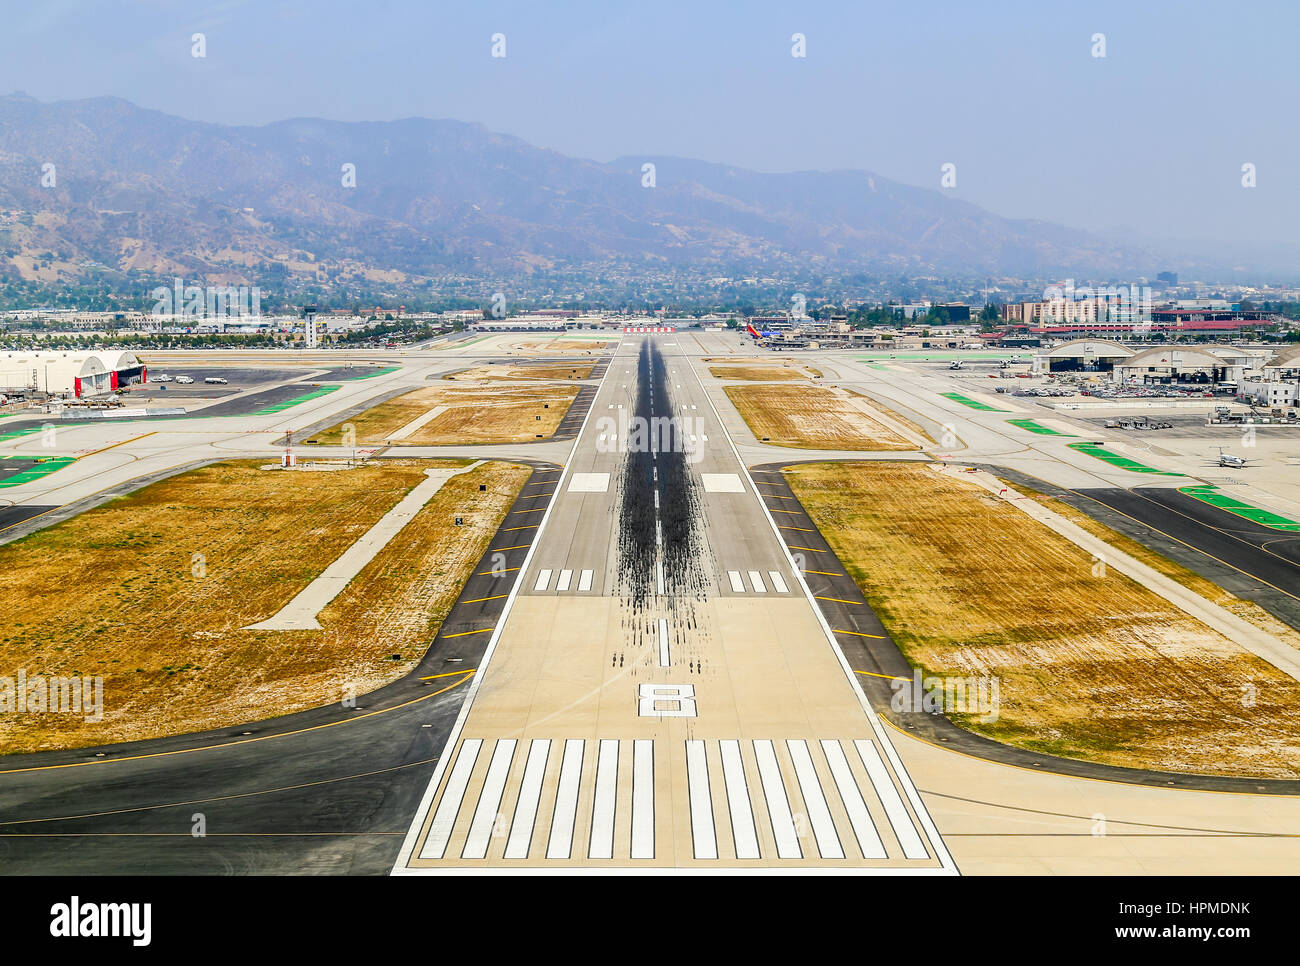 Burbank, USA - May 27, 2015: Aerial view of the airport with runways, hangars and parked airplanes. Stock Photo